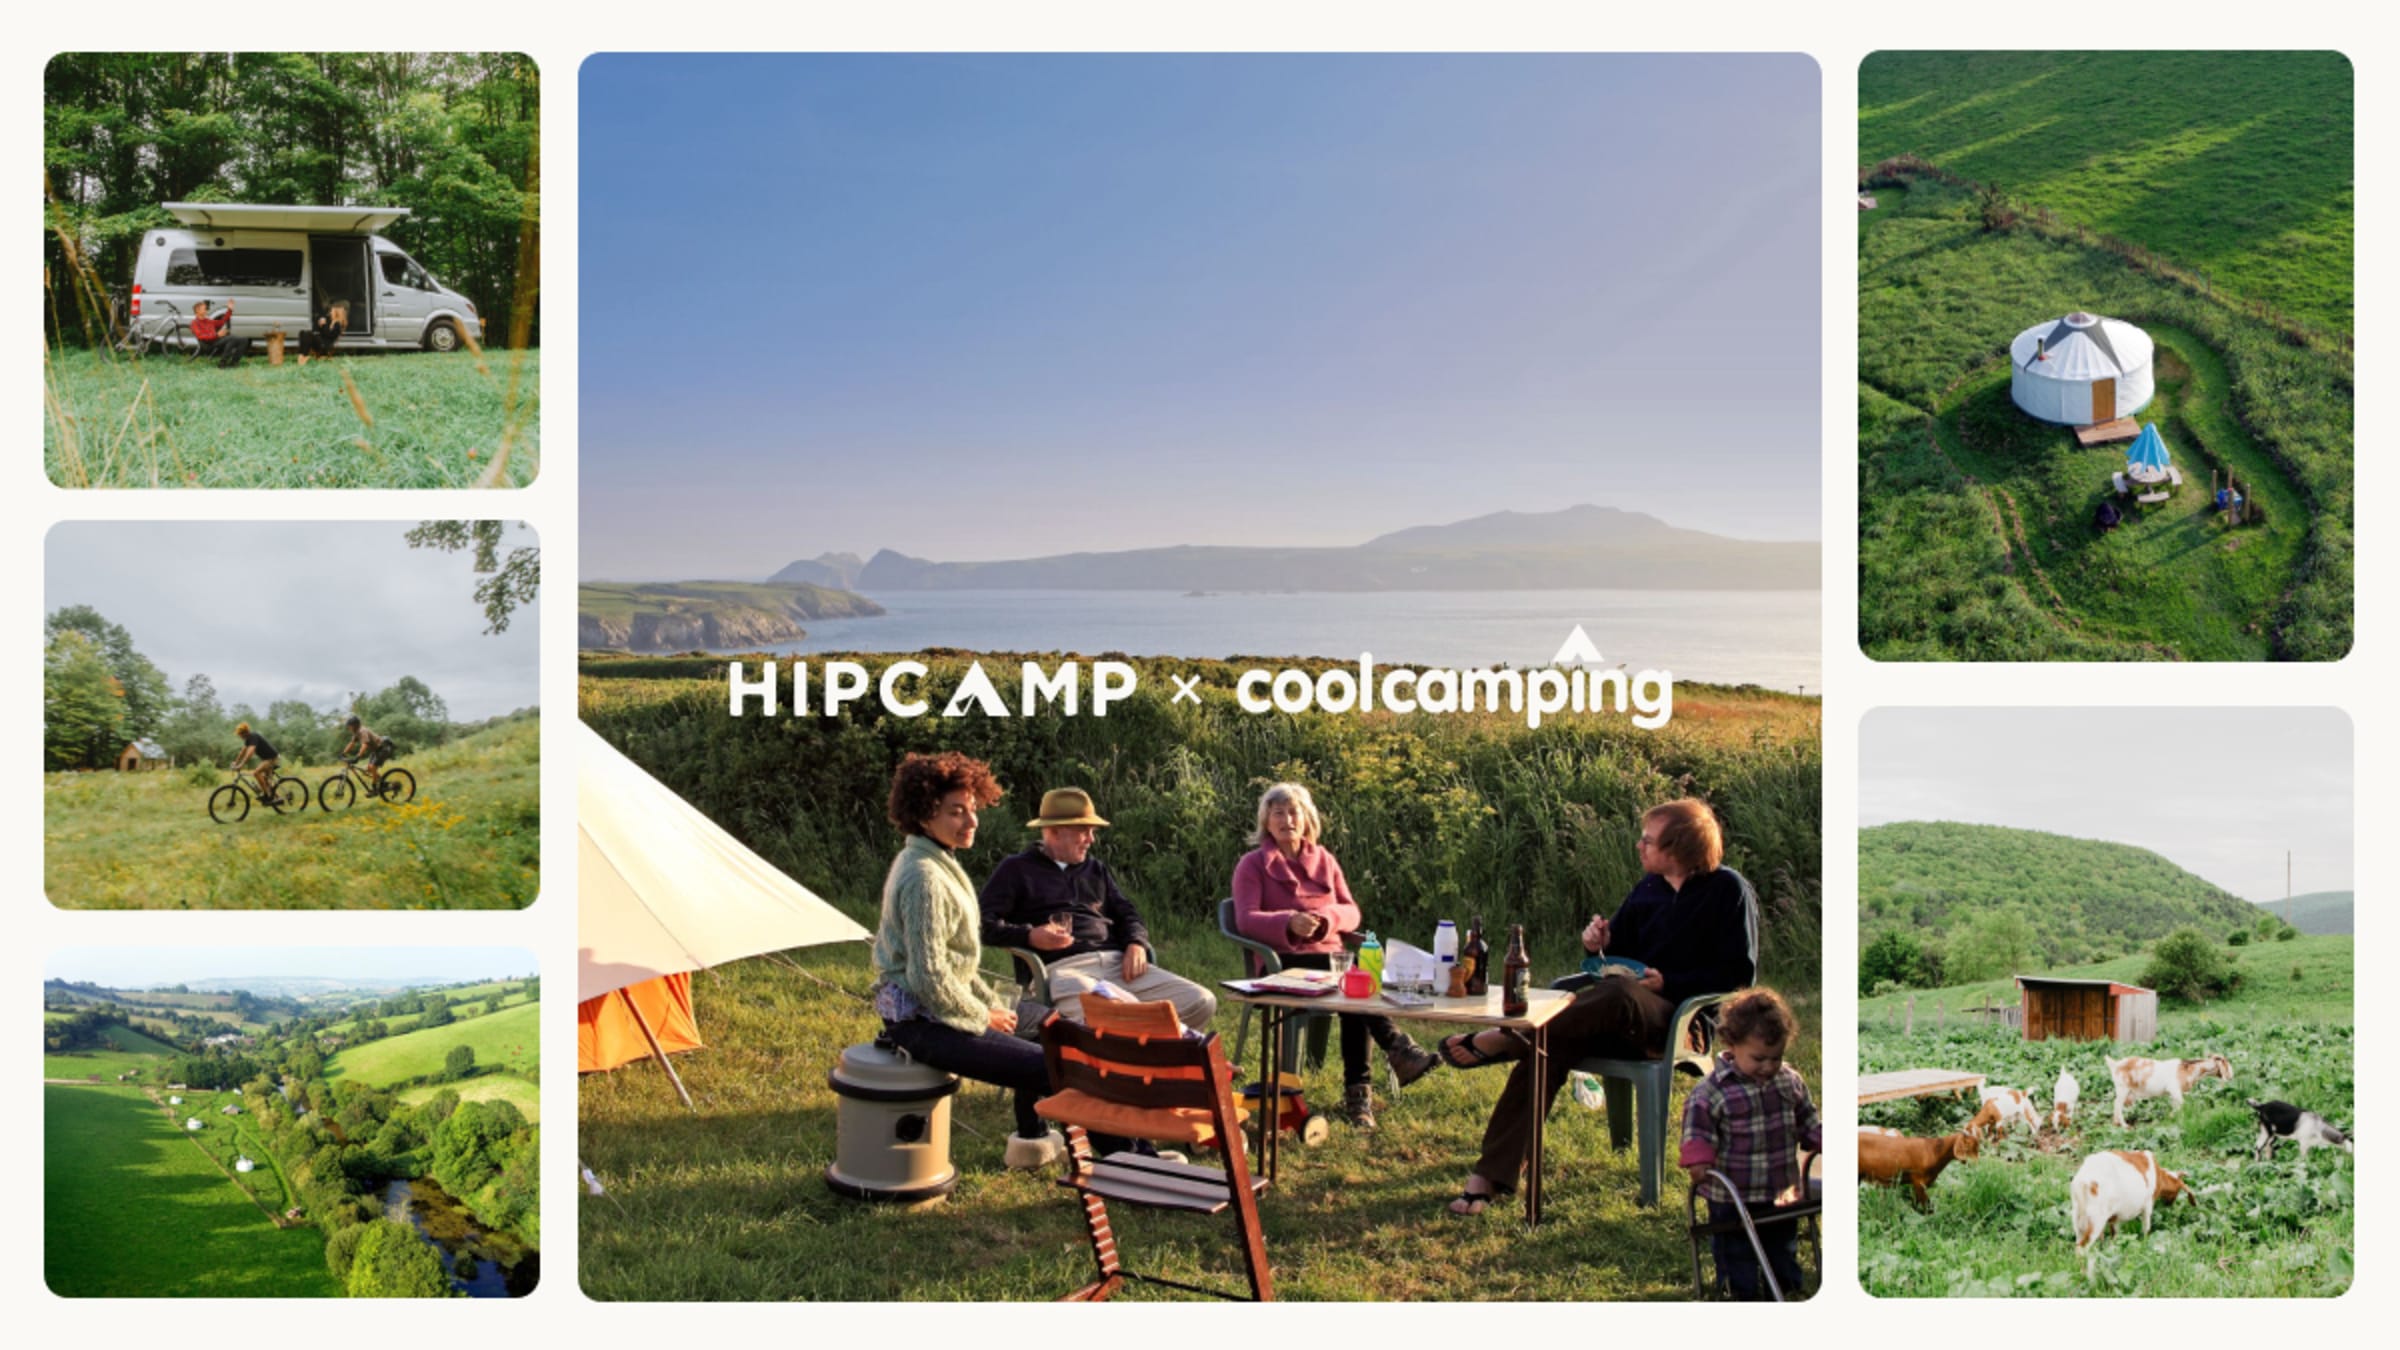 You can now Hipcamp in Europe